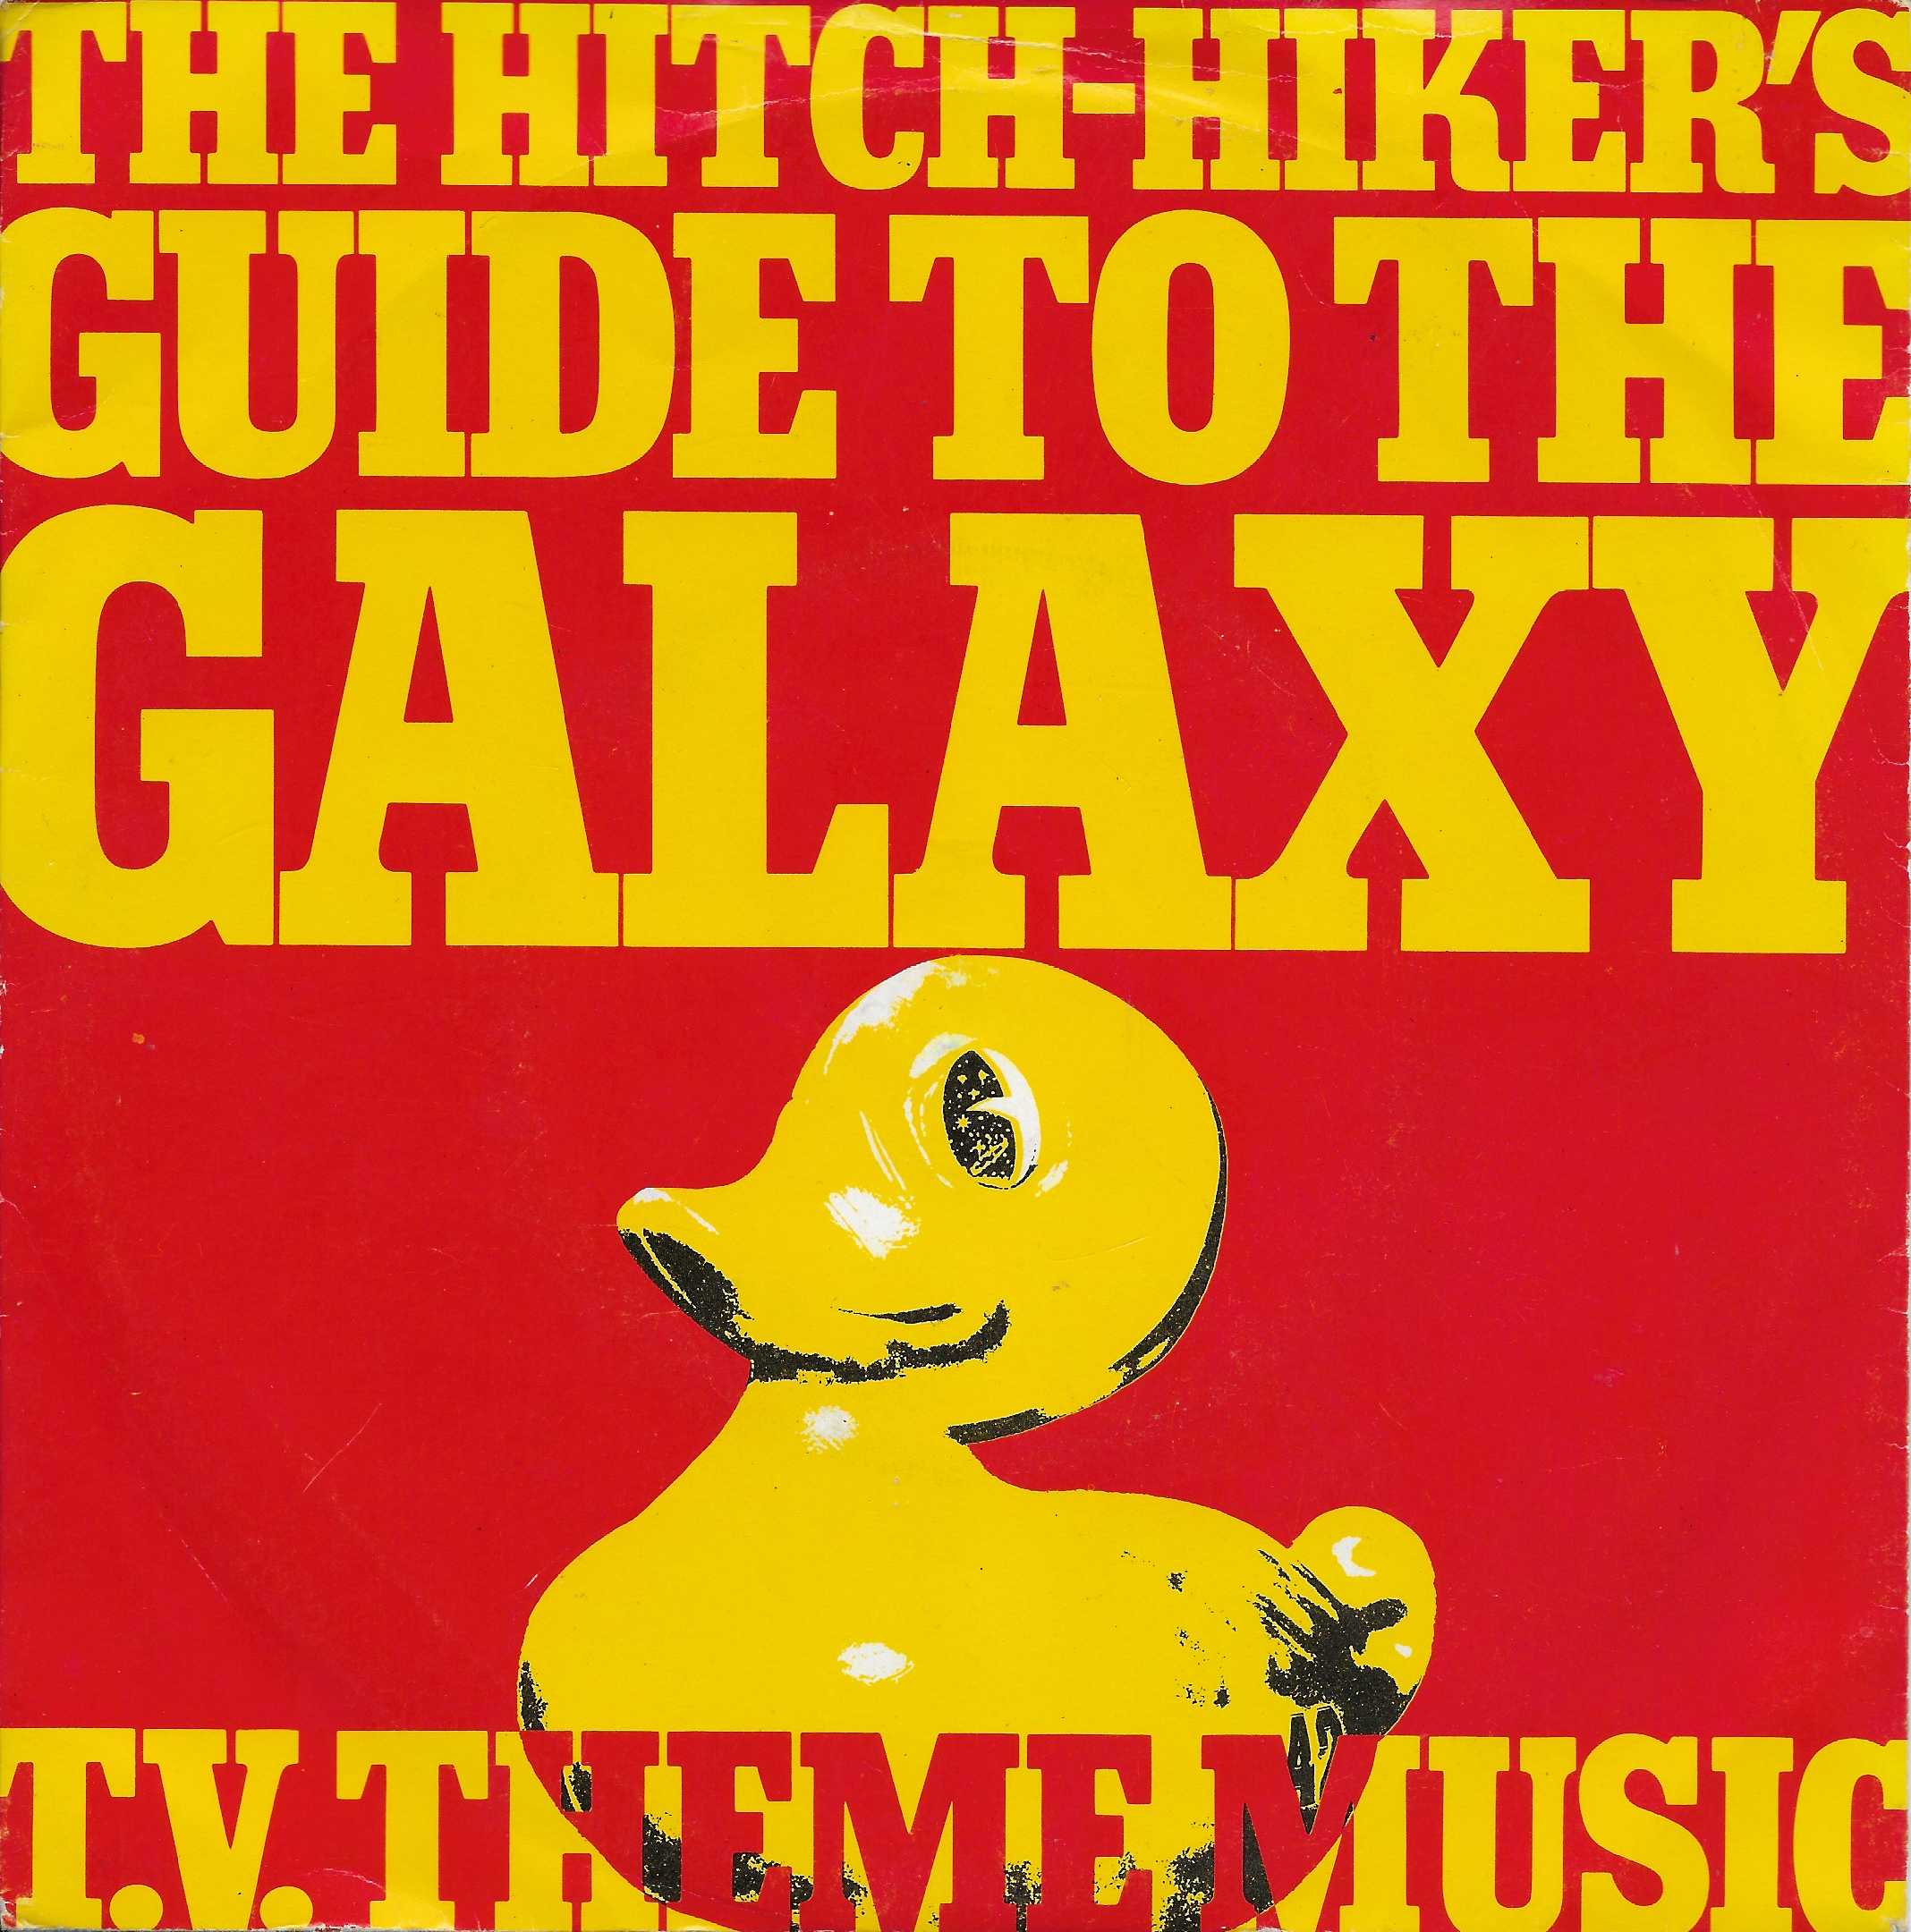 Picture of Journey of the sorcerer (Hitch-hiker's guide to the galaxy) by artist B. Leardon / T Souster / Eagles from the BBC singles - Records and Tapes library